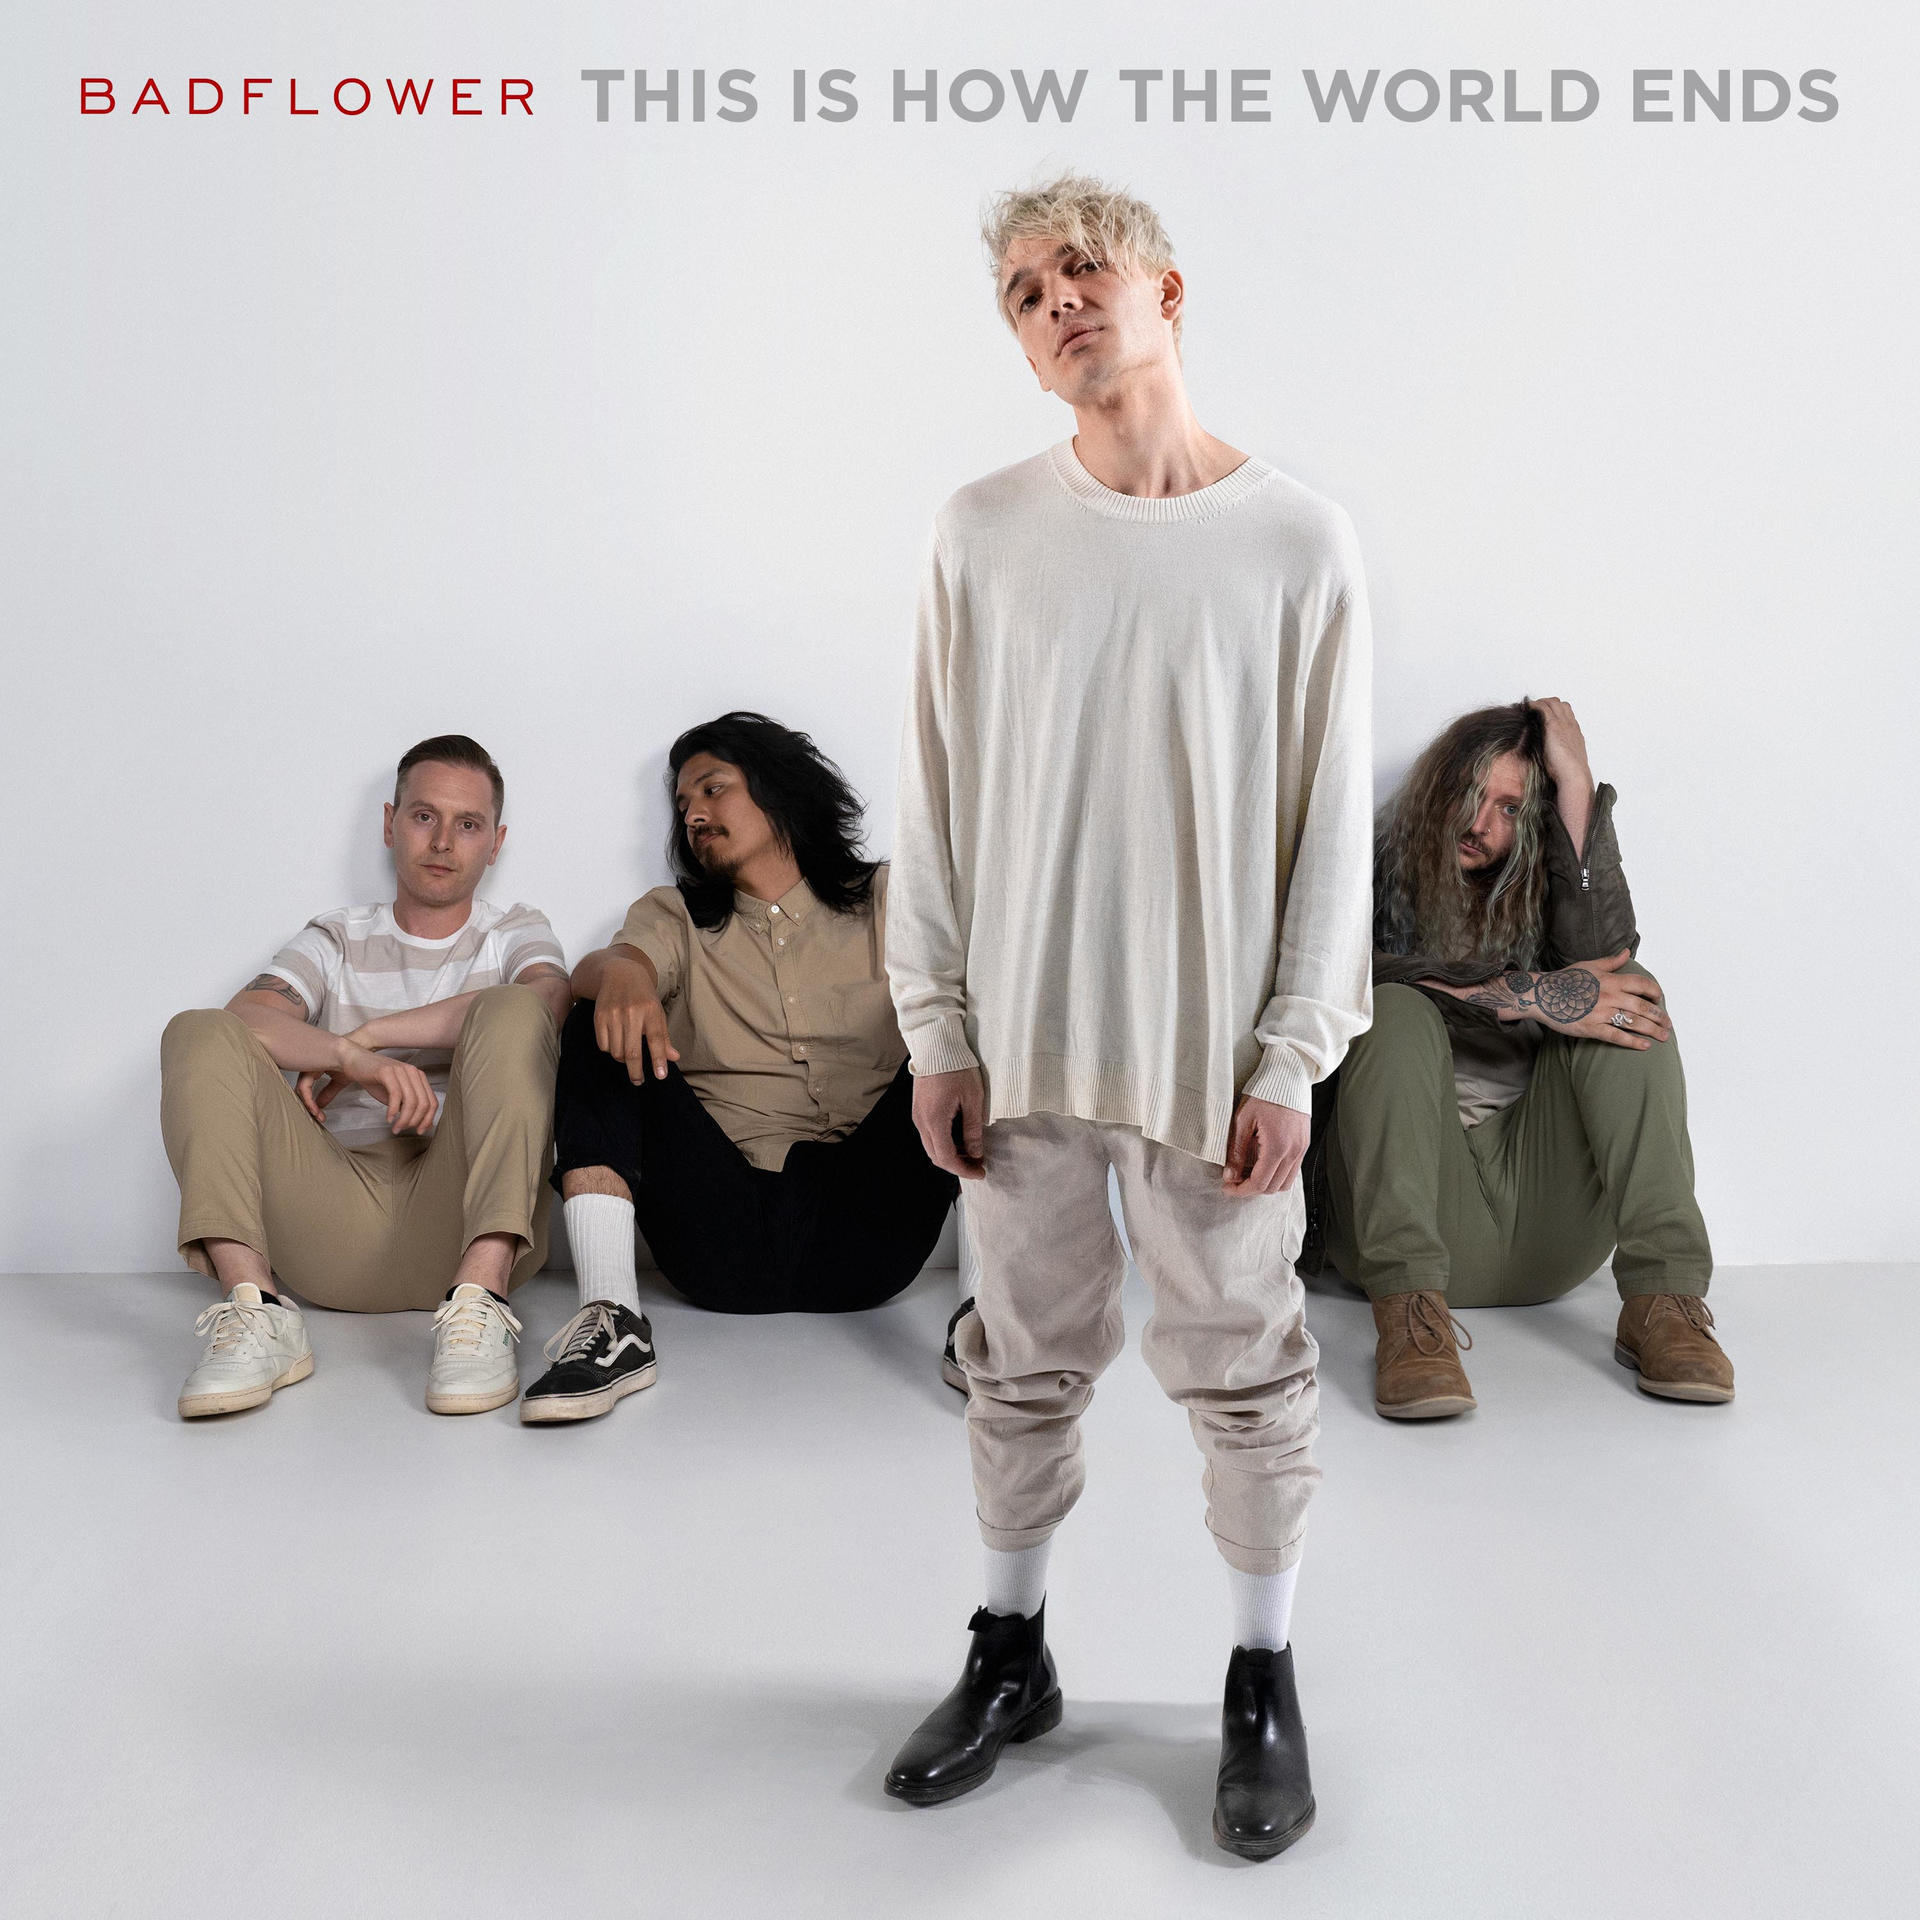 Badflower - This How Is Ends The World - (CD)